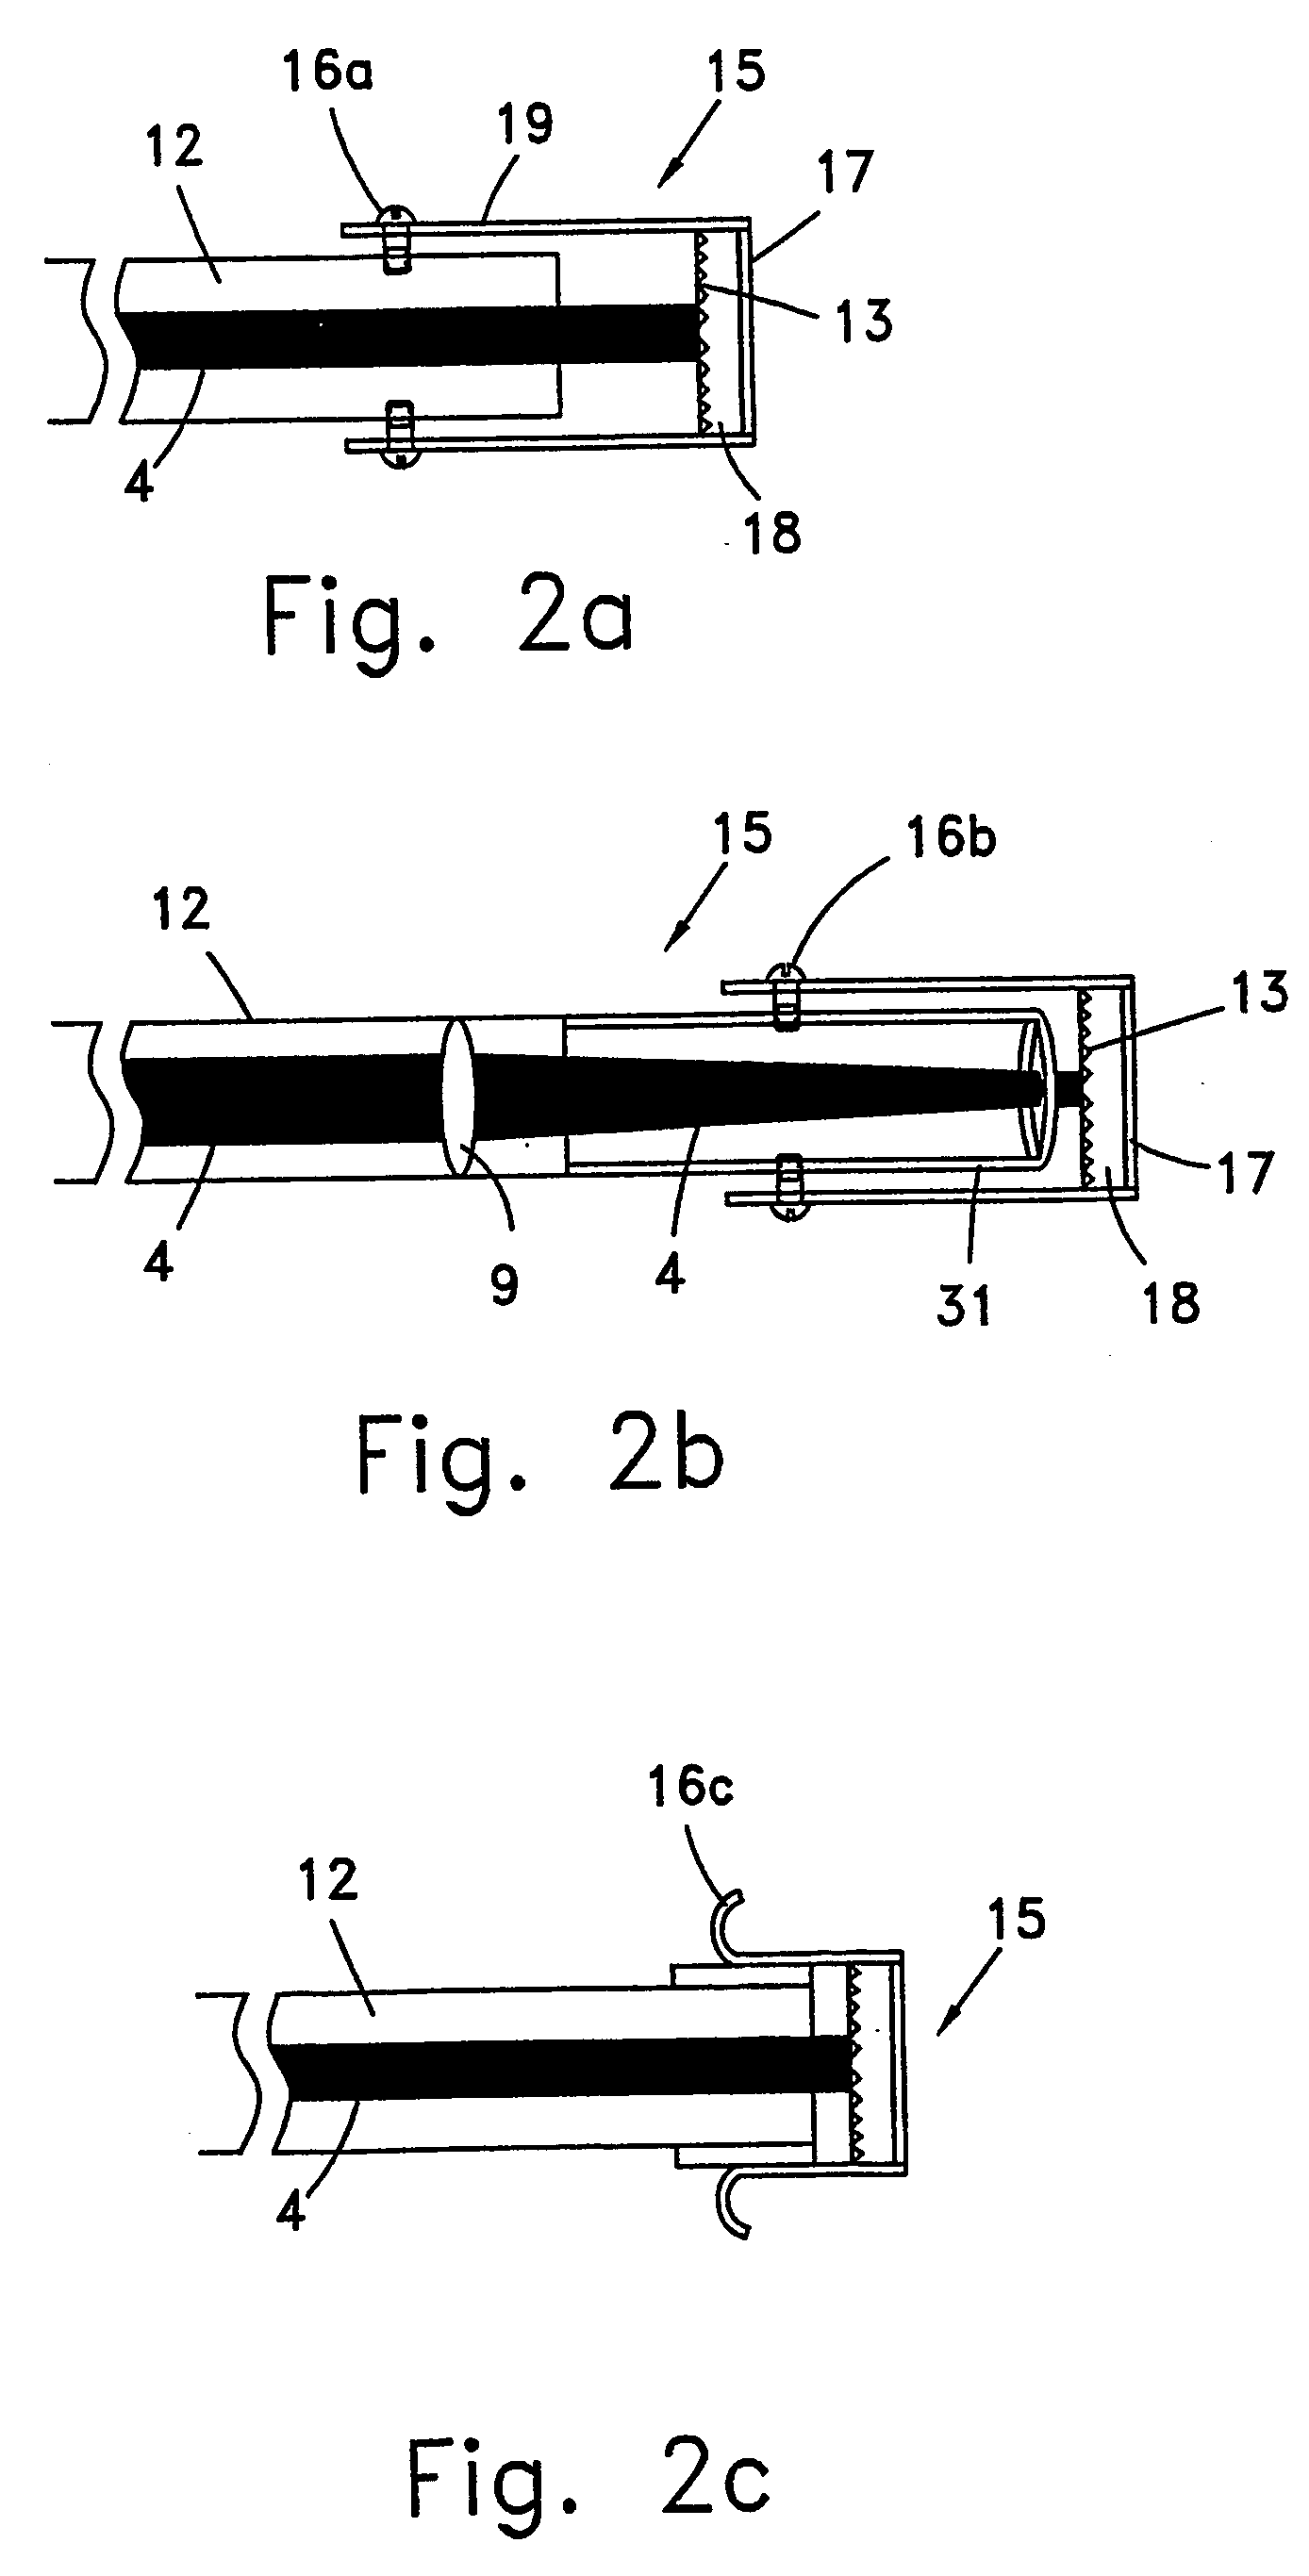 Method and apparatus for improving safety during exposure to a monochromatic light source